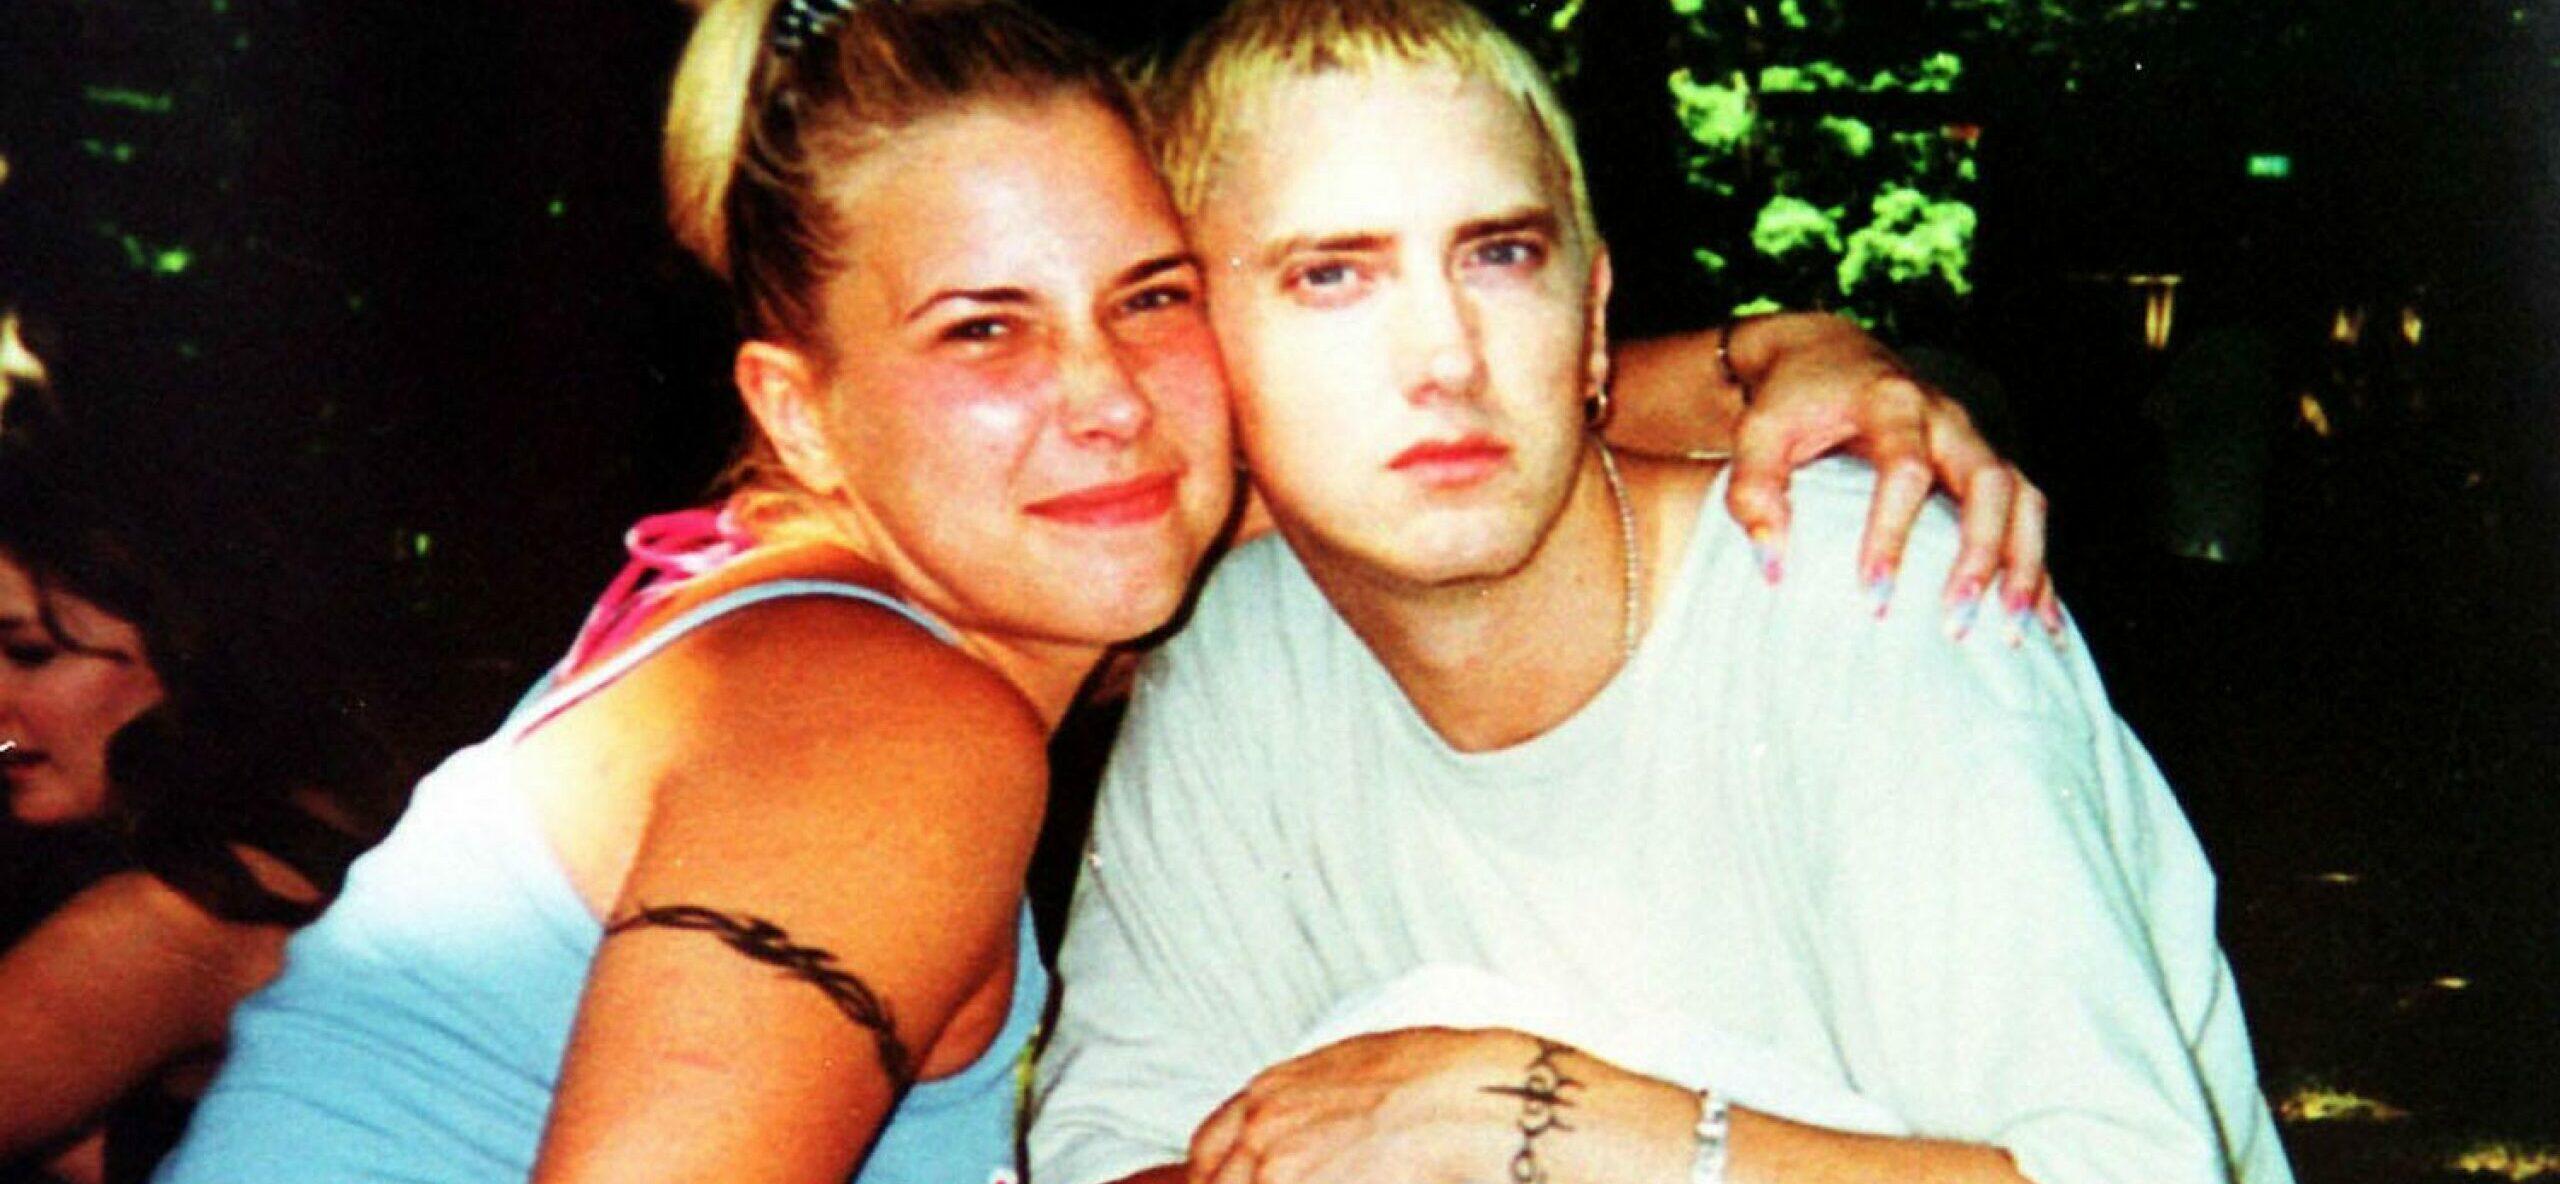 Eminem's Ex-Wife Reportedly Attempts Suicide